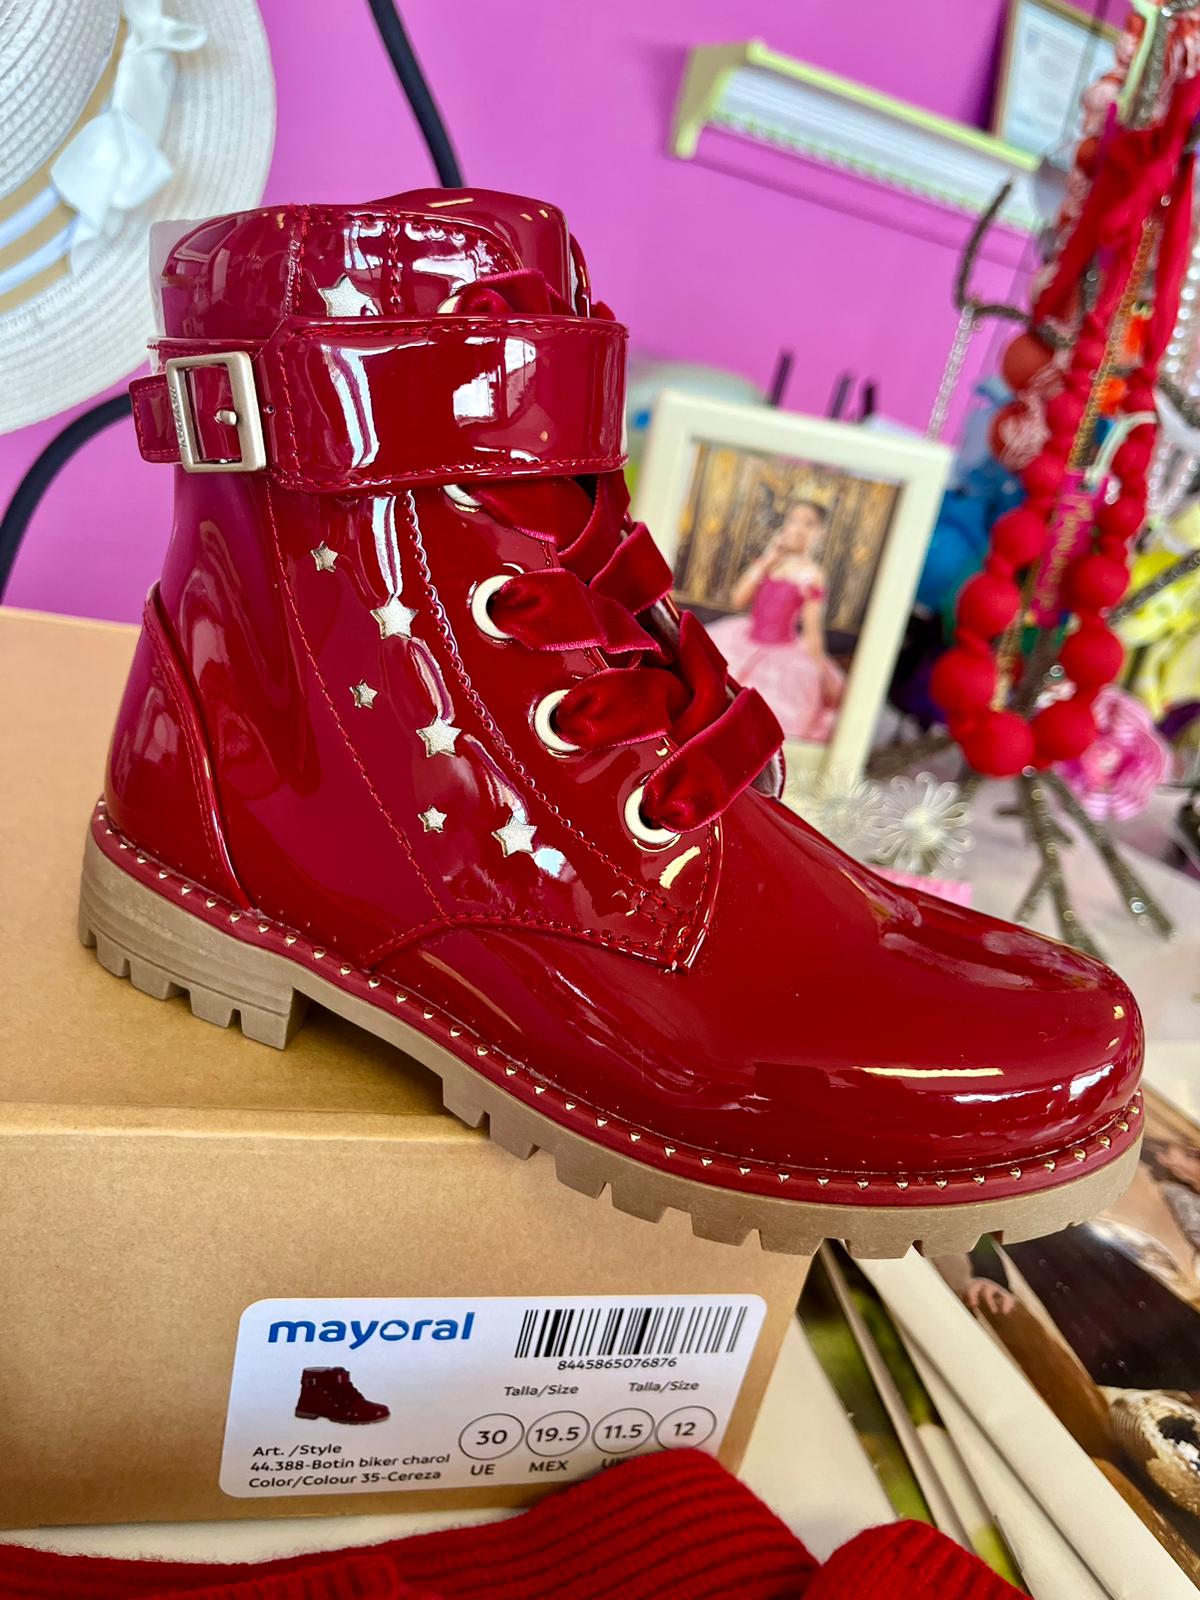 New Mayoral Boots